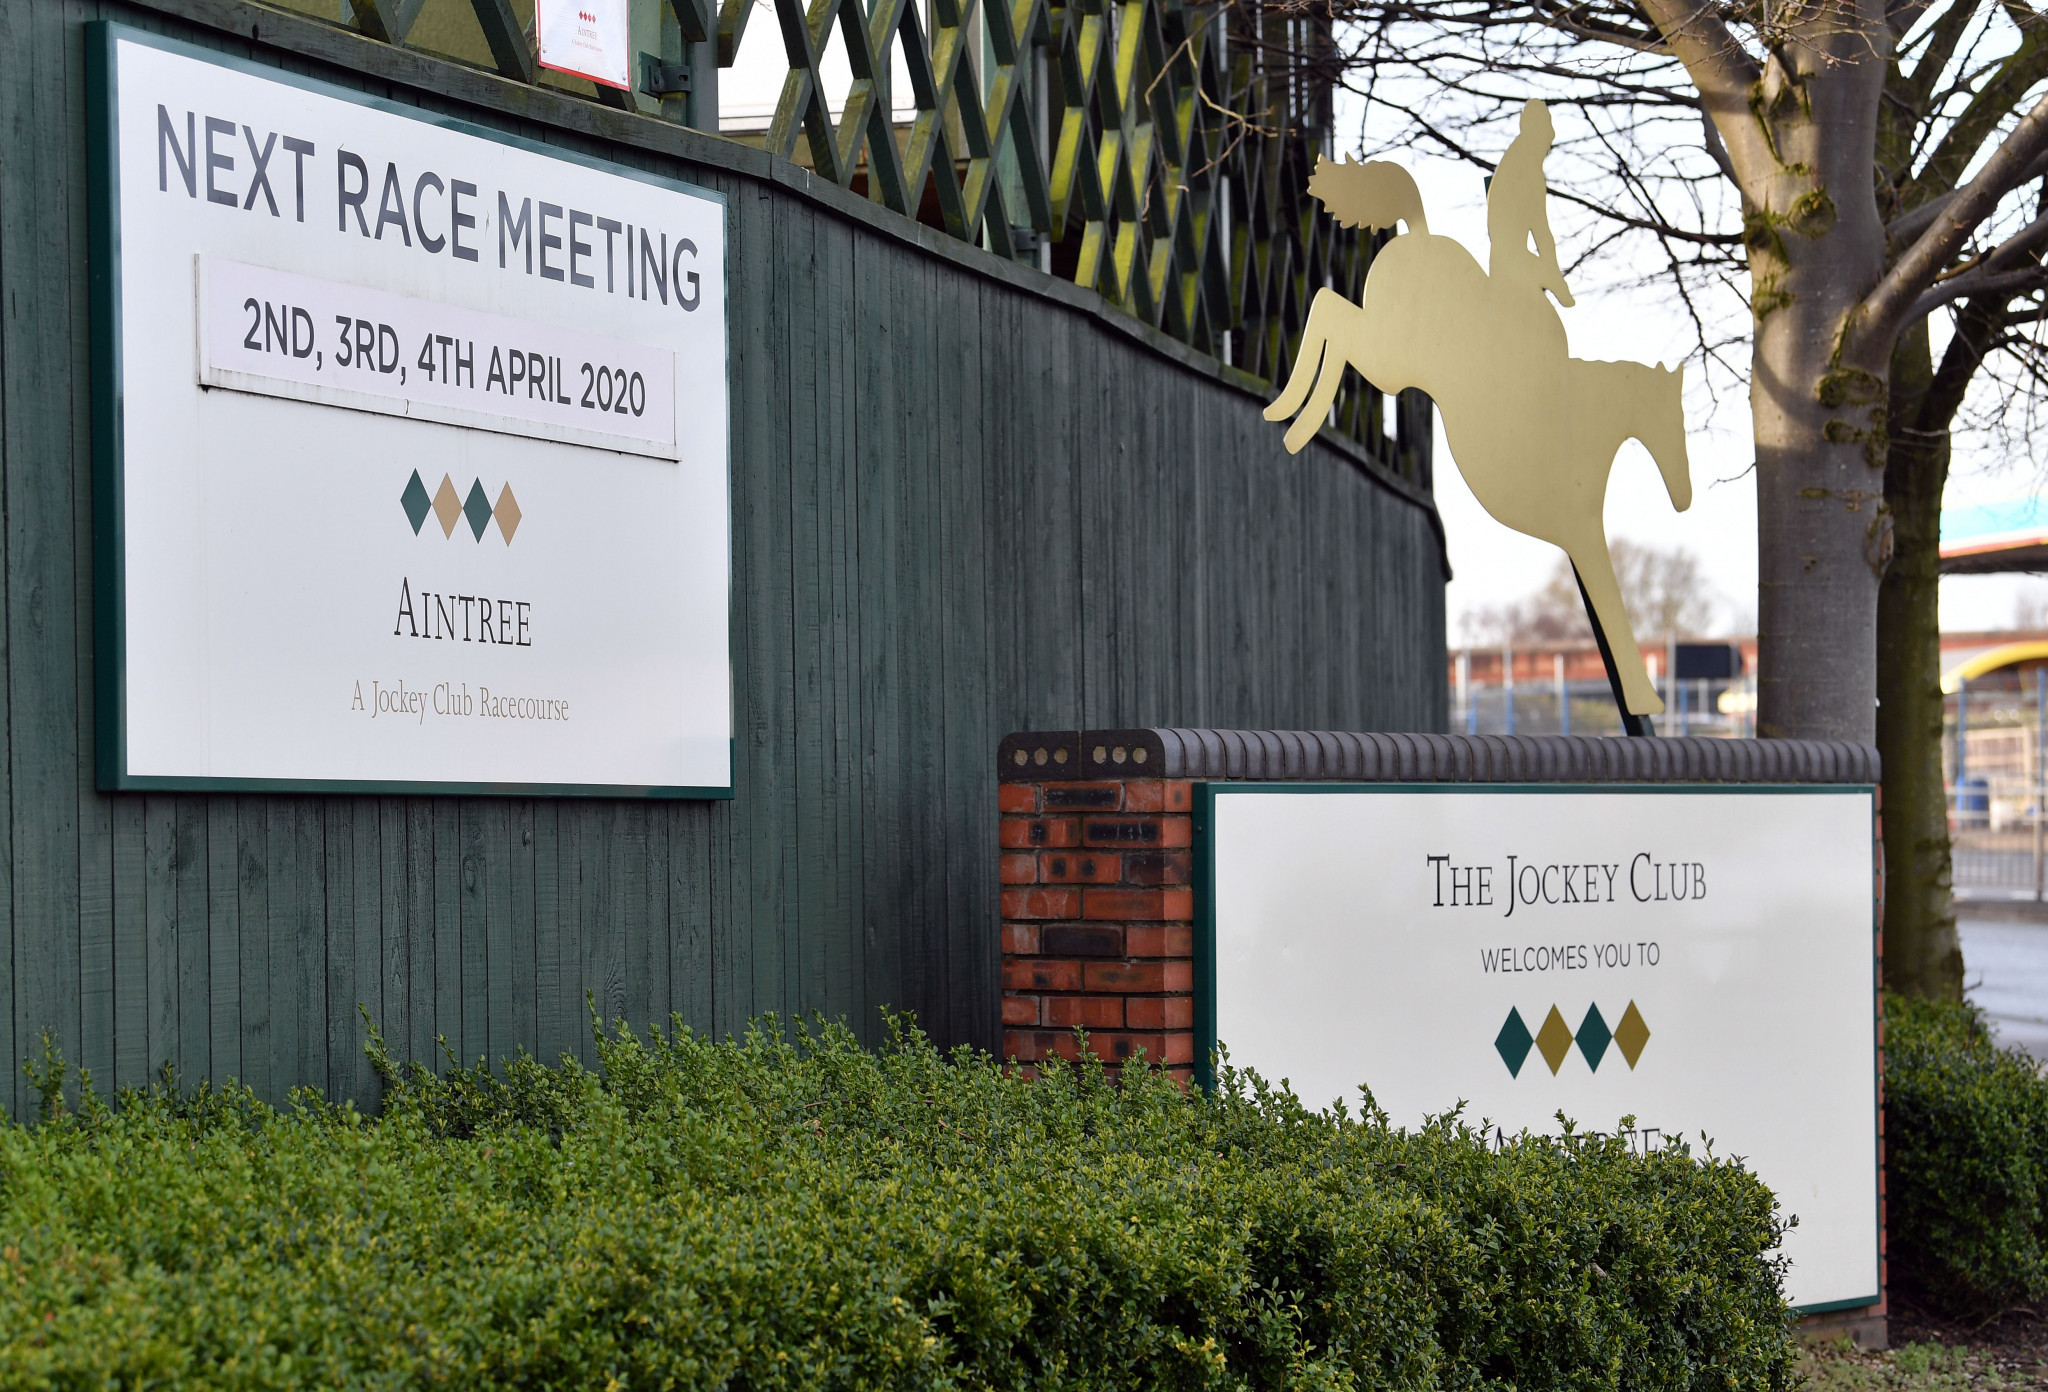 The Jockey Club operates racecourses including Aintree ©Getty Images